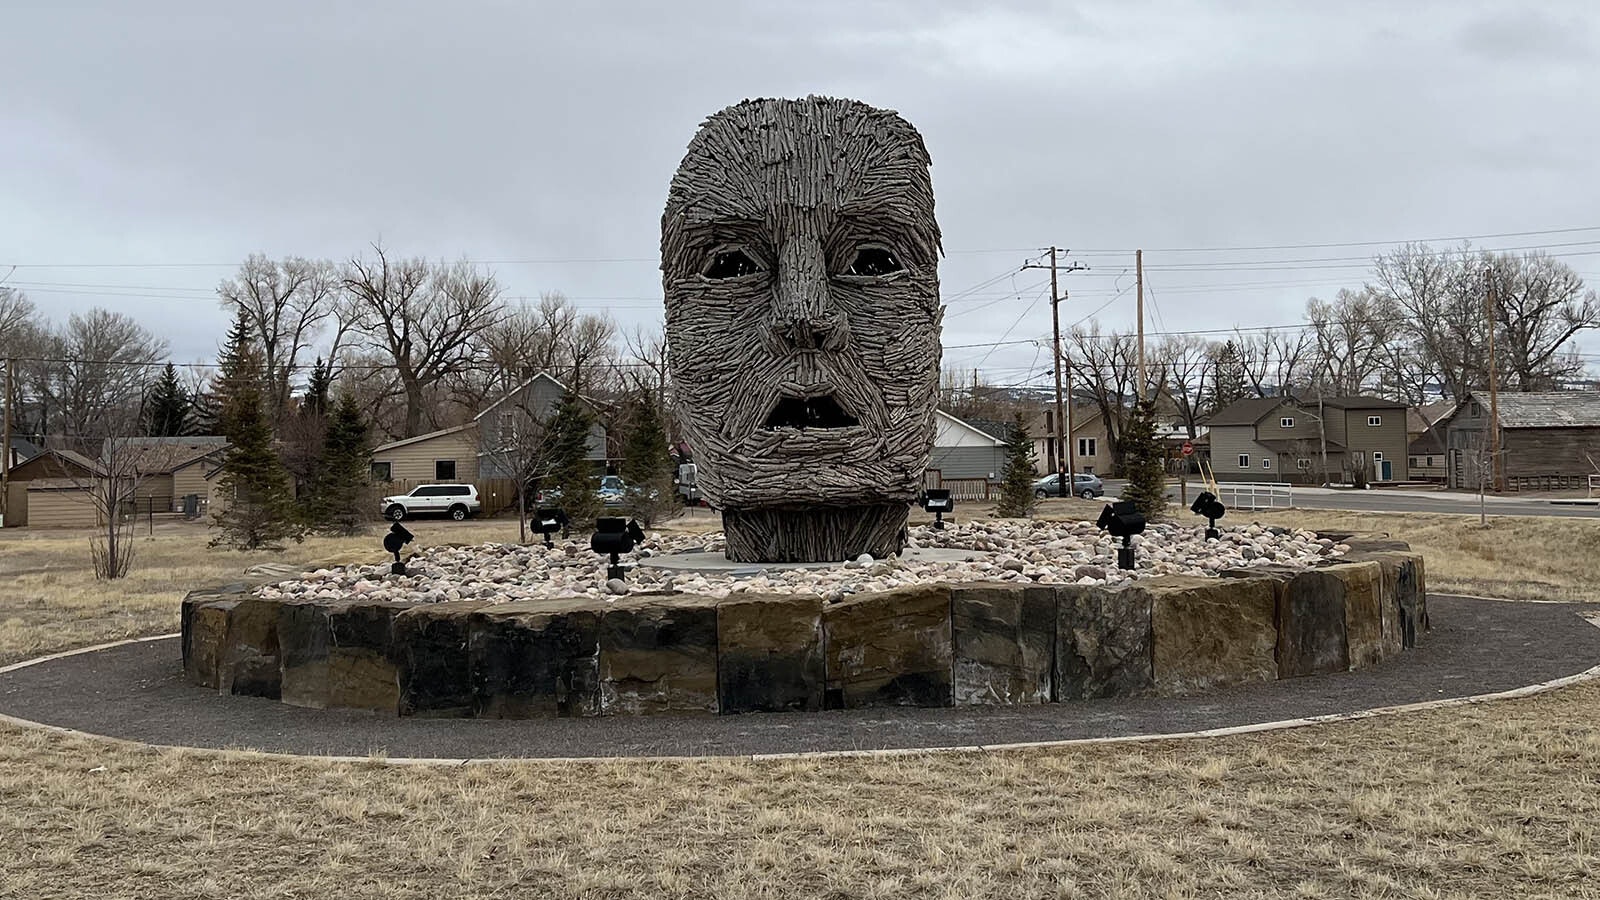 The “Exhaling Dissolution” sculpture at the intersection of Clark Street and Snowy Range Road in Laramie is scheduled to soon be rotated out for another public art display. Locals have taken to calling it “the Joe Biden head” because many think it bears a resemblance to the current U.S. President.